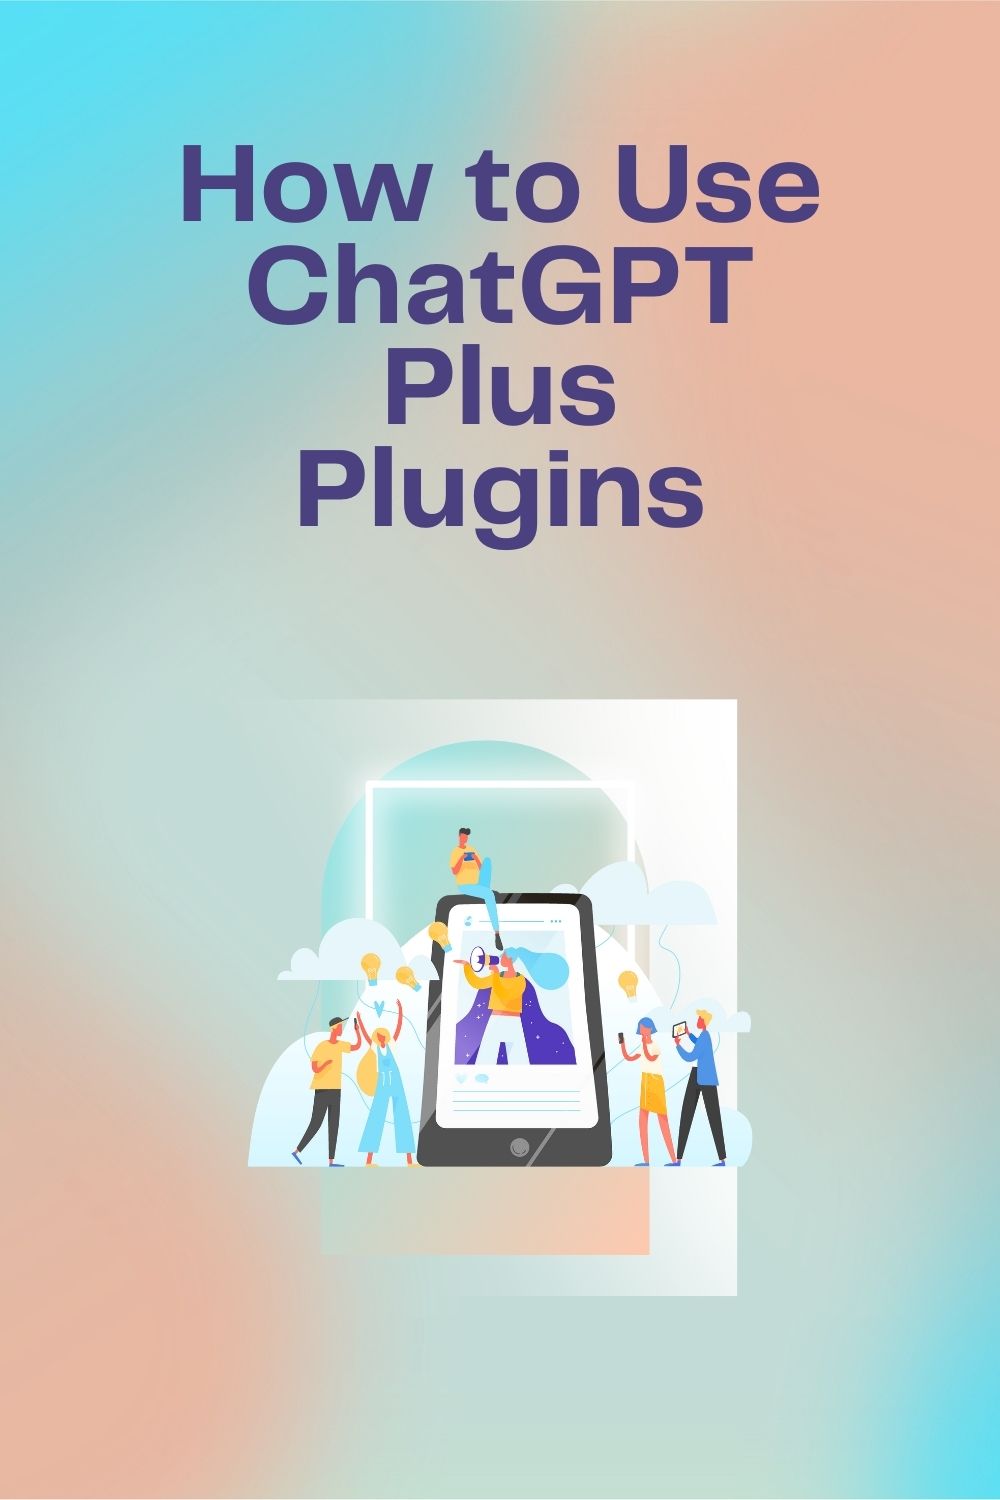 How to Use ChatGPT Plus Plugins